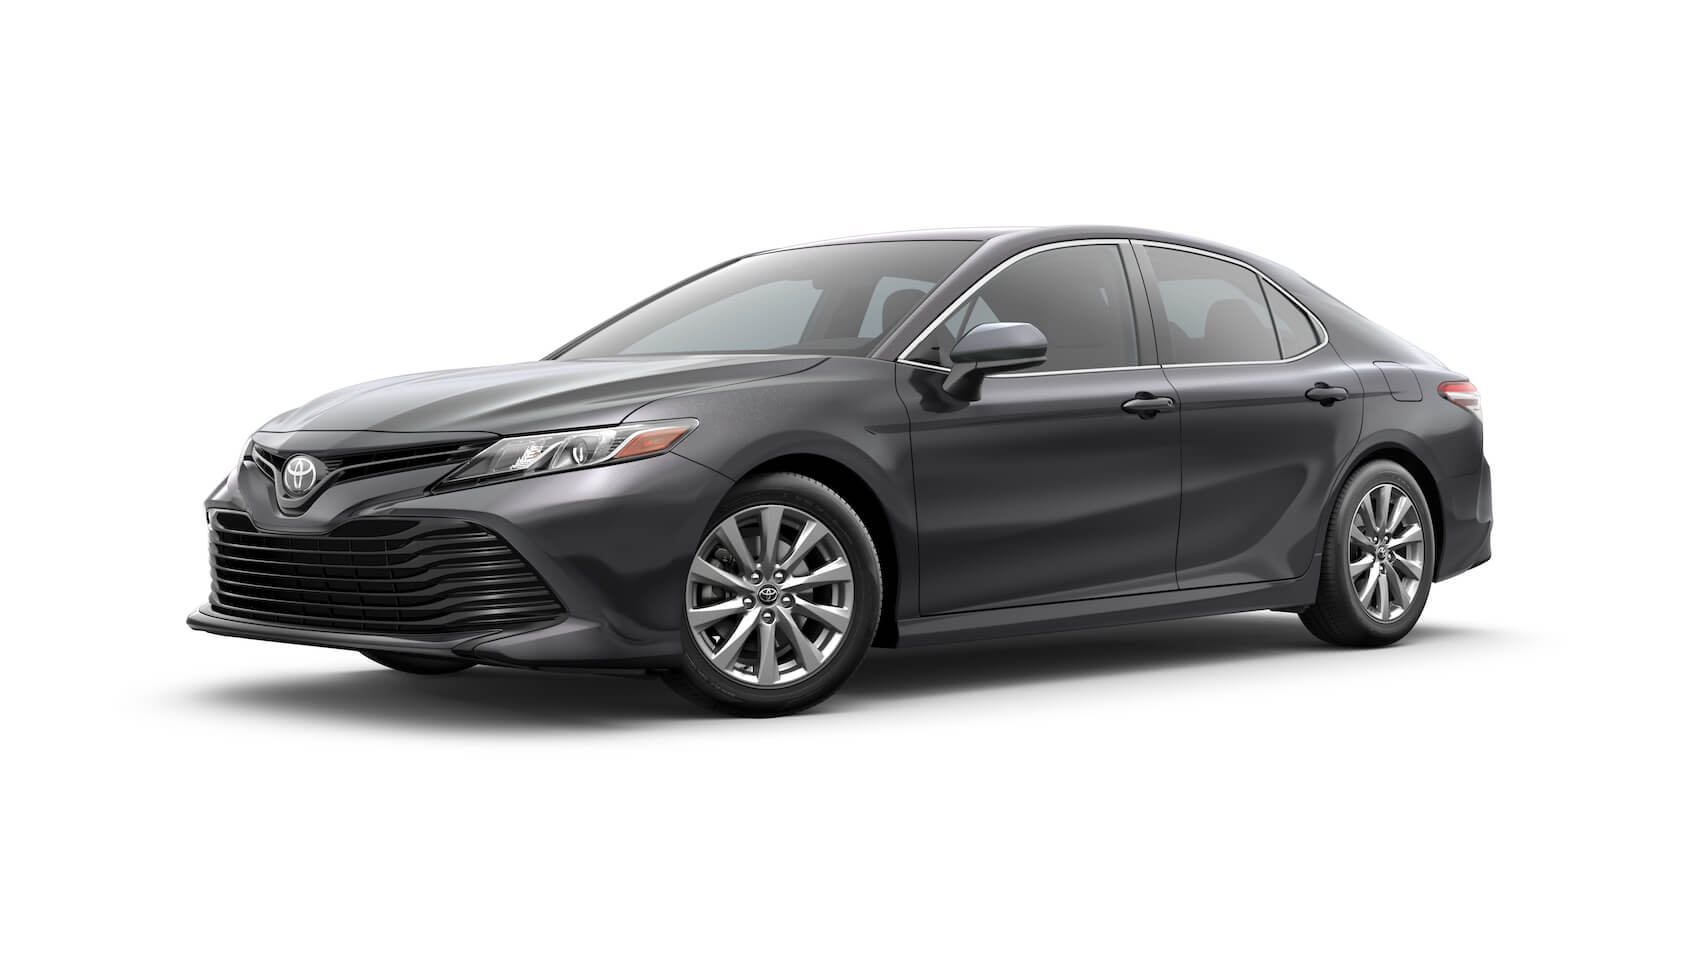 2020 Toyota Camry for sale near Clermont, FL